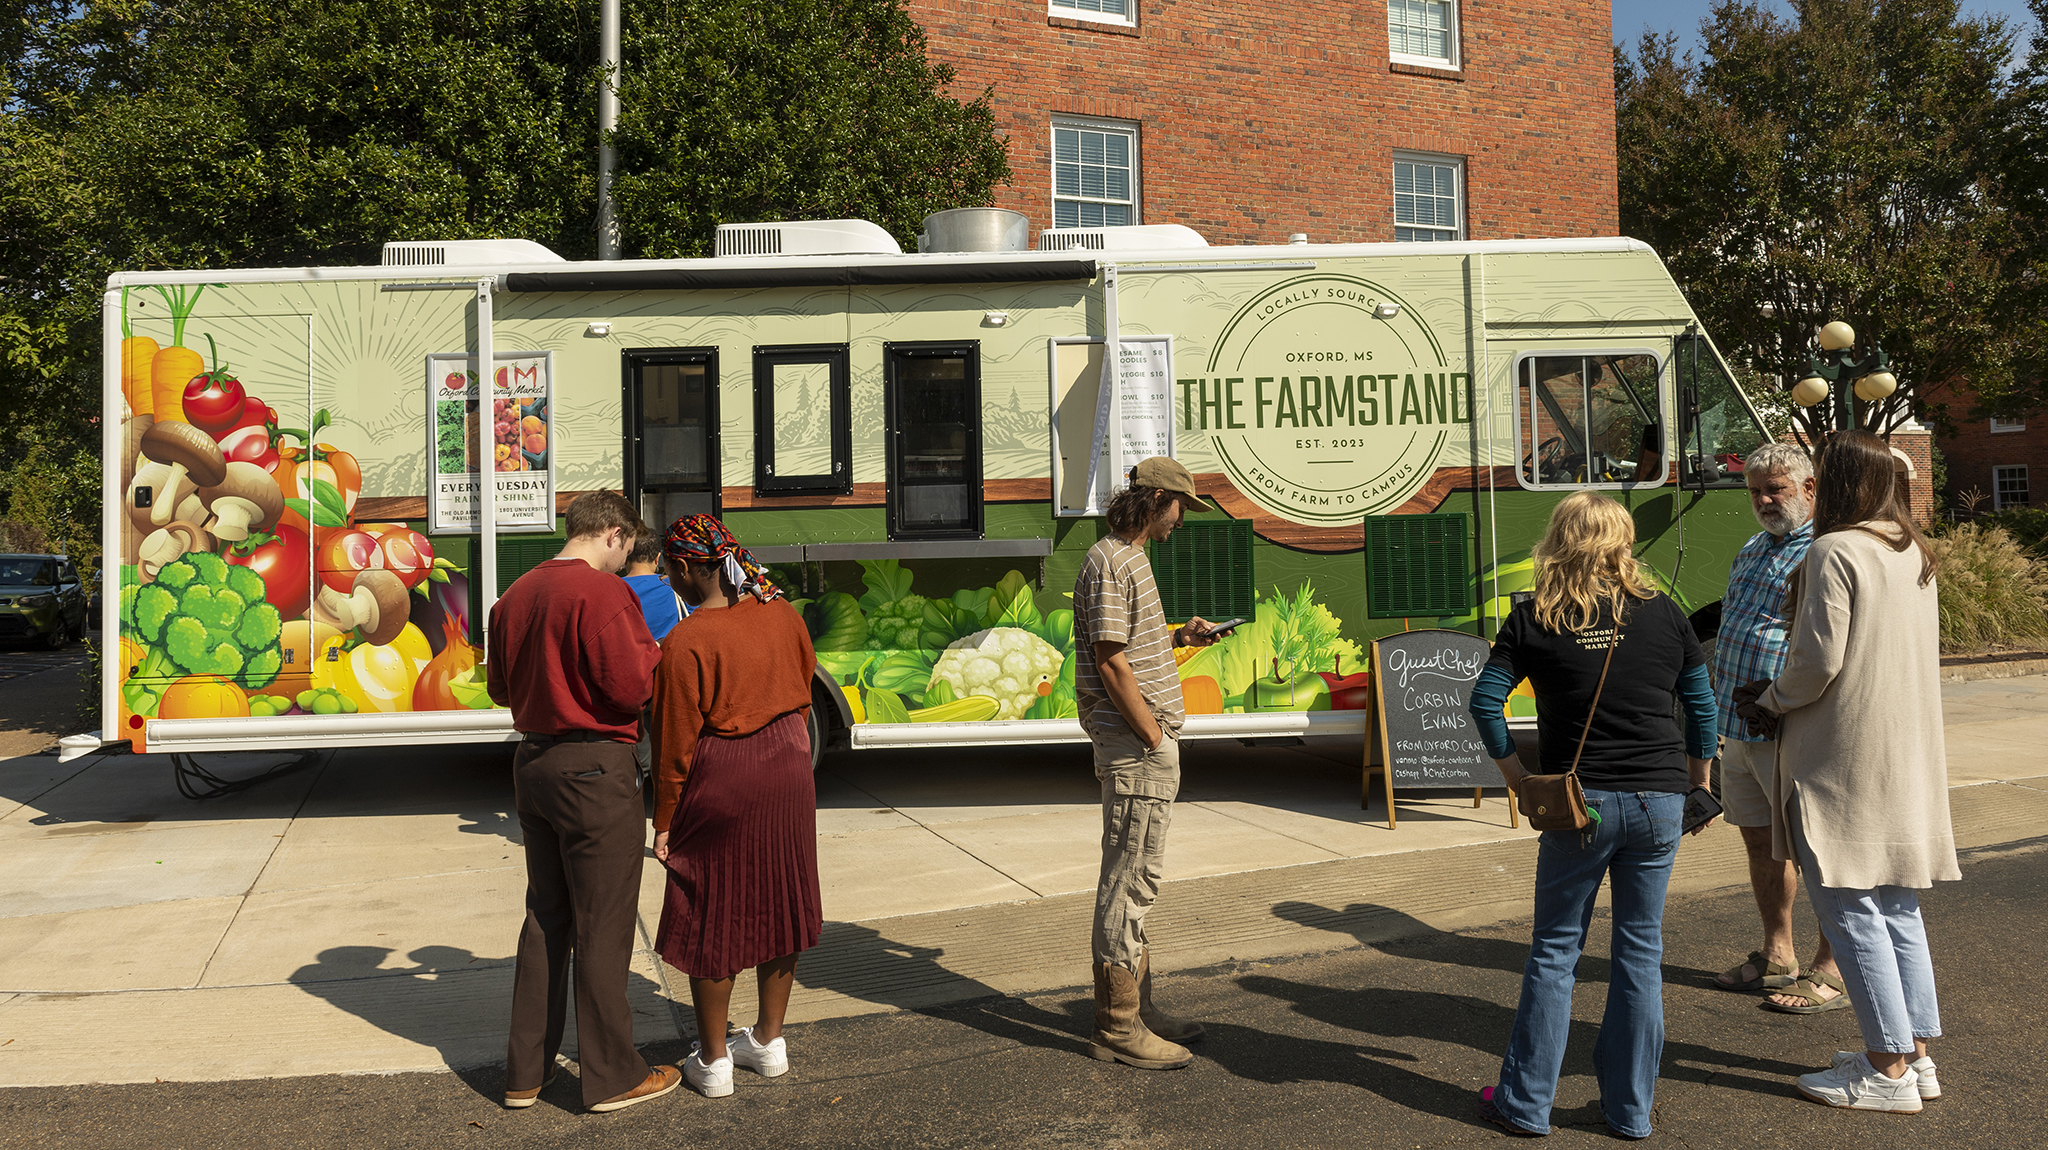 Students and staff members line up as The Farmstand food truck opens for business on campus. The venue is the result of a collaboration between the university’s Office of Sustainability, Grisham-McLean Institute and Department of Nutrition and Hospitality Management, and the Oxford Community Market. Photo by Srijita Chattopadhyay/Ole Miss Digital Imaging Services